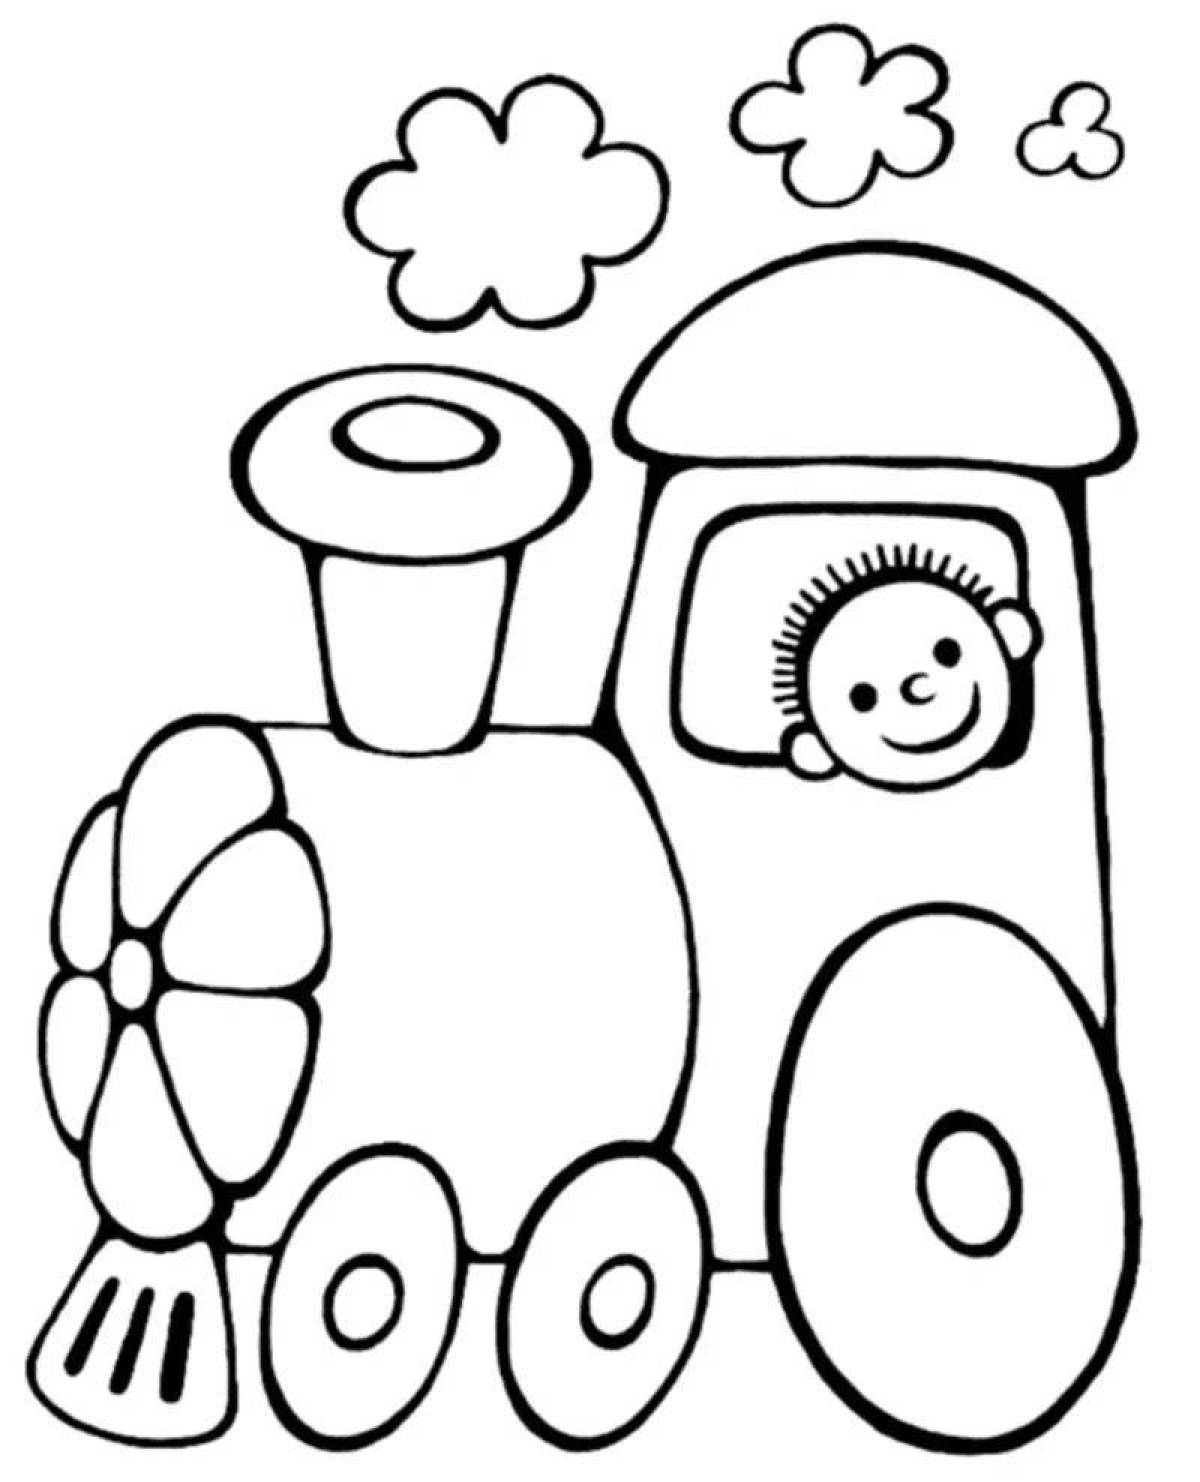 Live train coloring book for 2-3 year olds